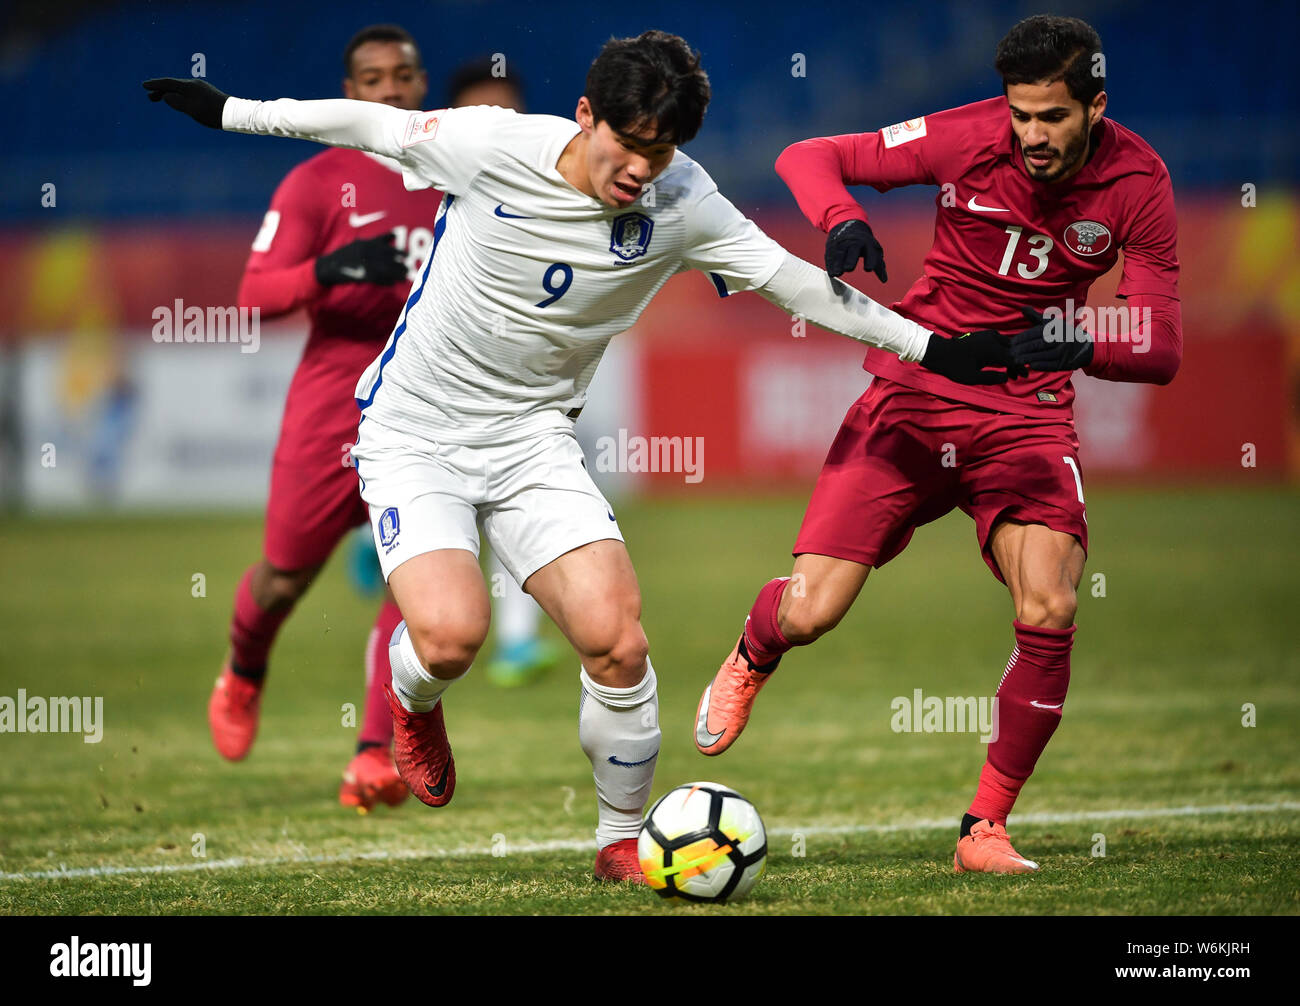 Lee Keun-ho, left, of South Korea kicks the ball to make a pass against Sultan Al-Brake of Qatar in their final match to fight for the third place dur Stock Photo